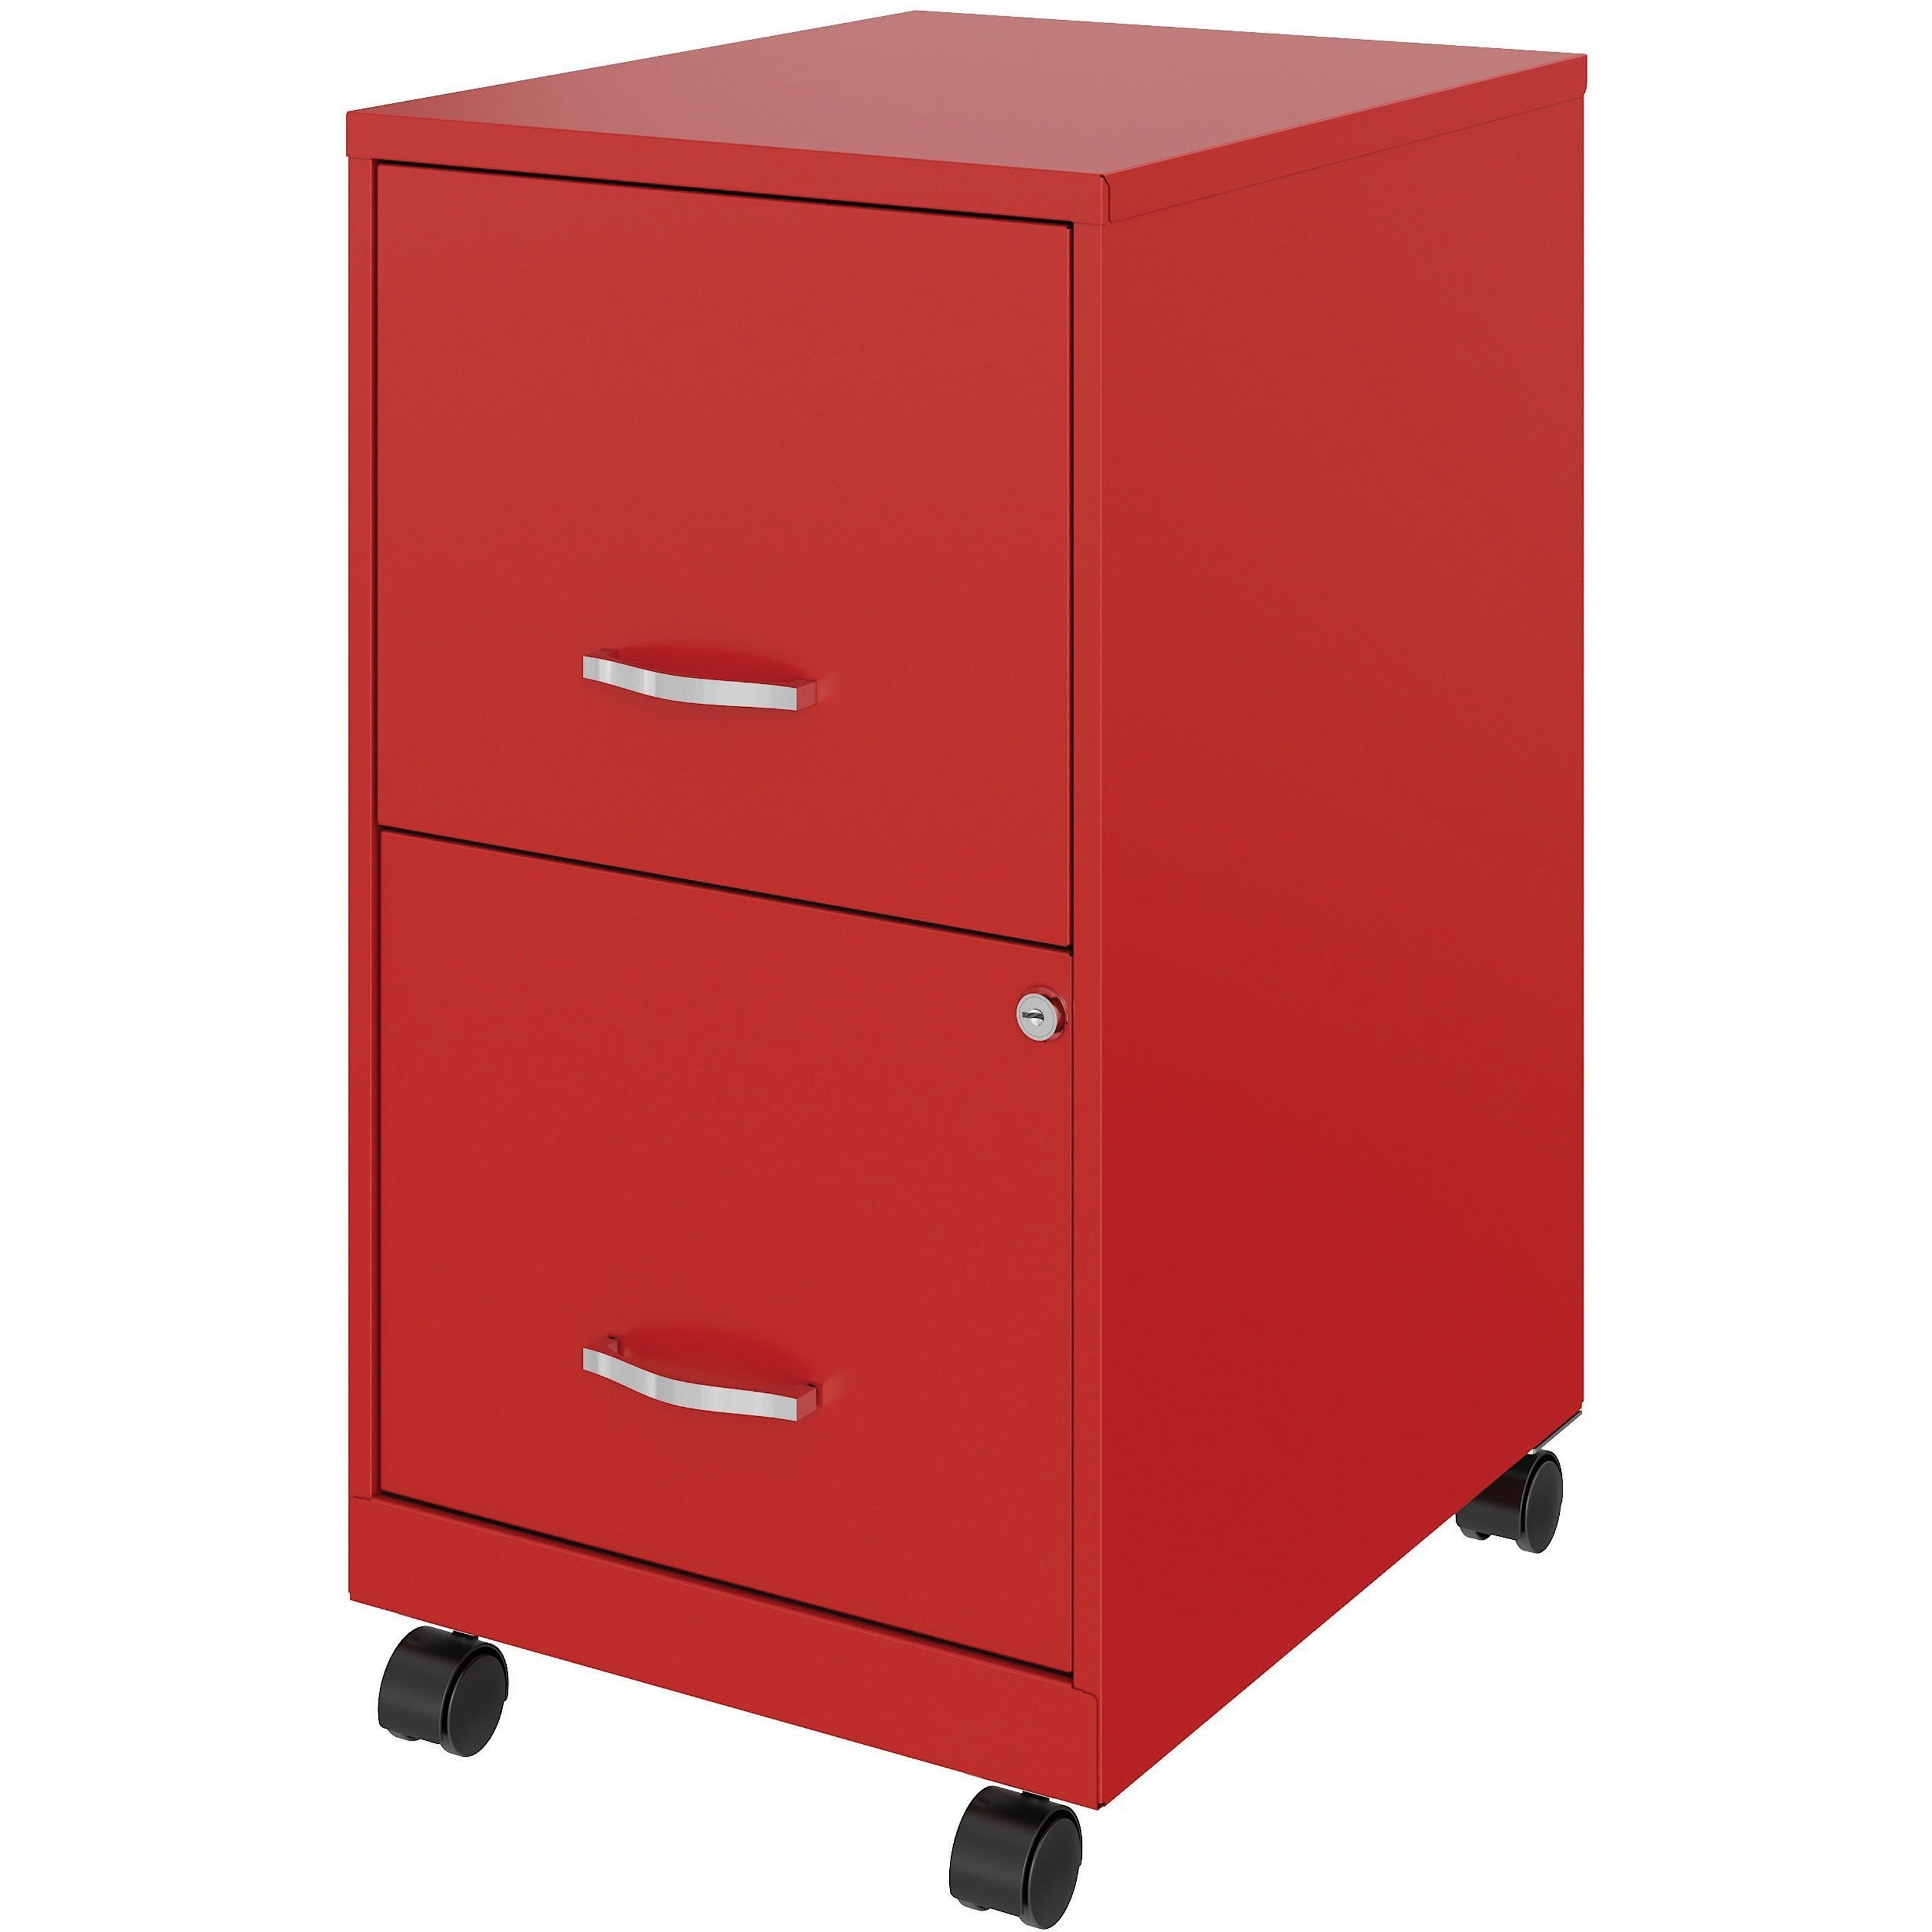 nusparc-mobile-file-cabinet-142-x-18-x-265-for-file-letter-mobility-locking-drawer-glide-suspension-3-4-drawer-extension-cam-lock-nonporous-surface-red-painted-steel-steel-recycled-assembly-required_nprvf218amrd - 3